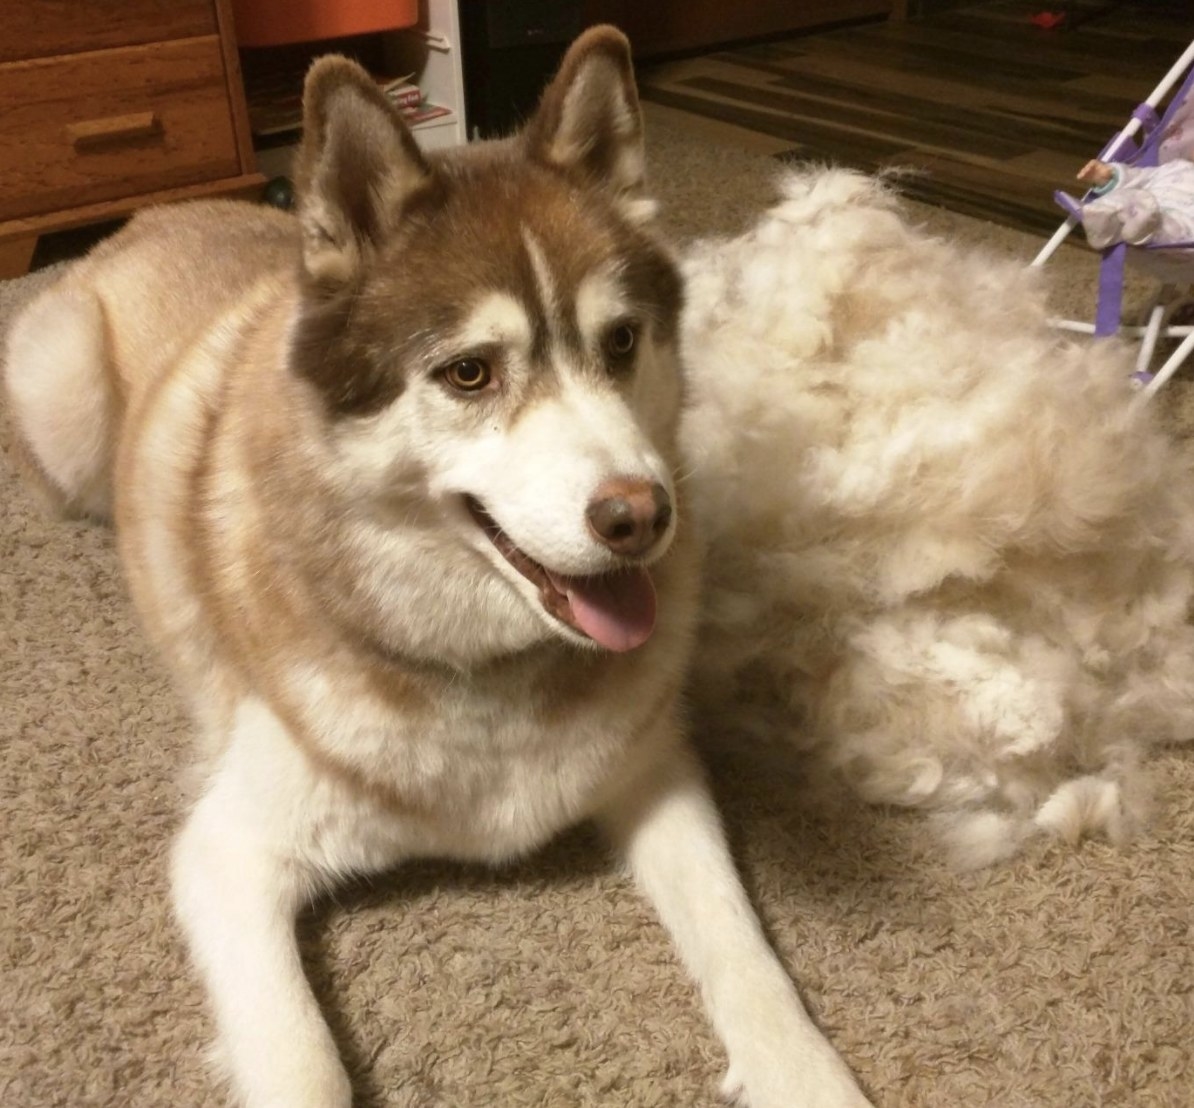 A dog sitting on a carpet next to a huge pile of fur